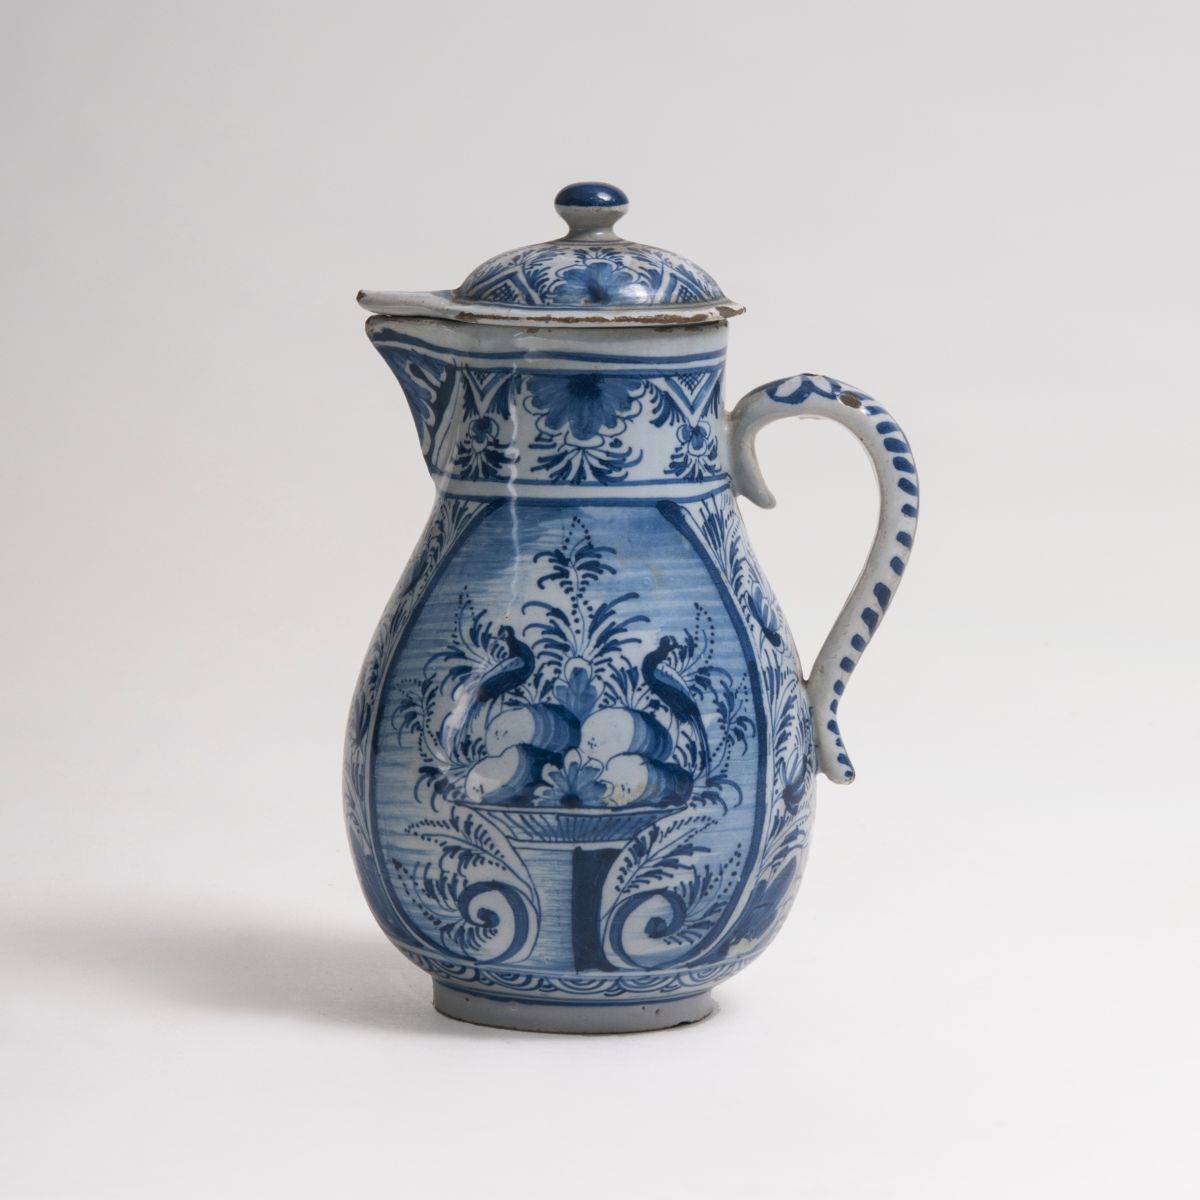 A small Faience pear-shaped Jug with blue painting